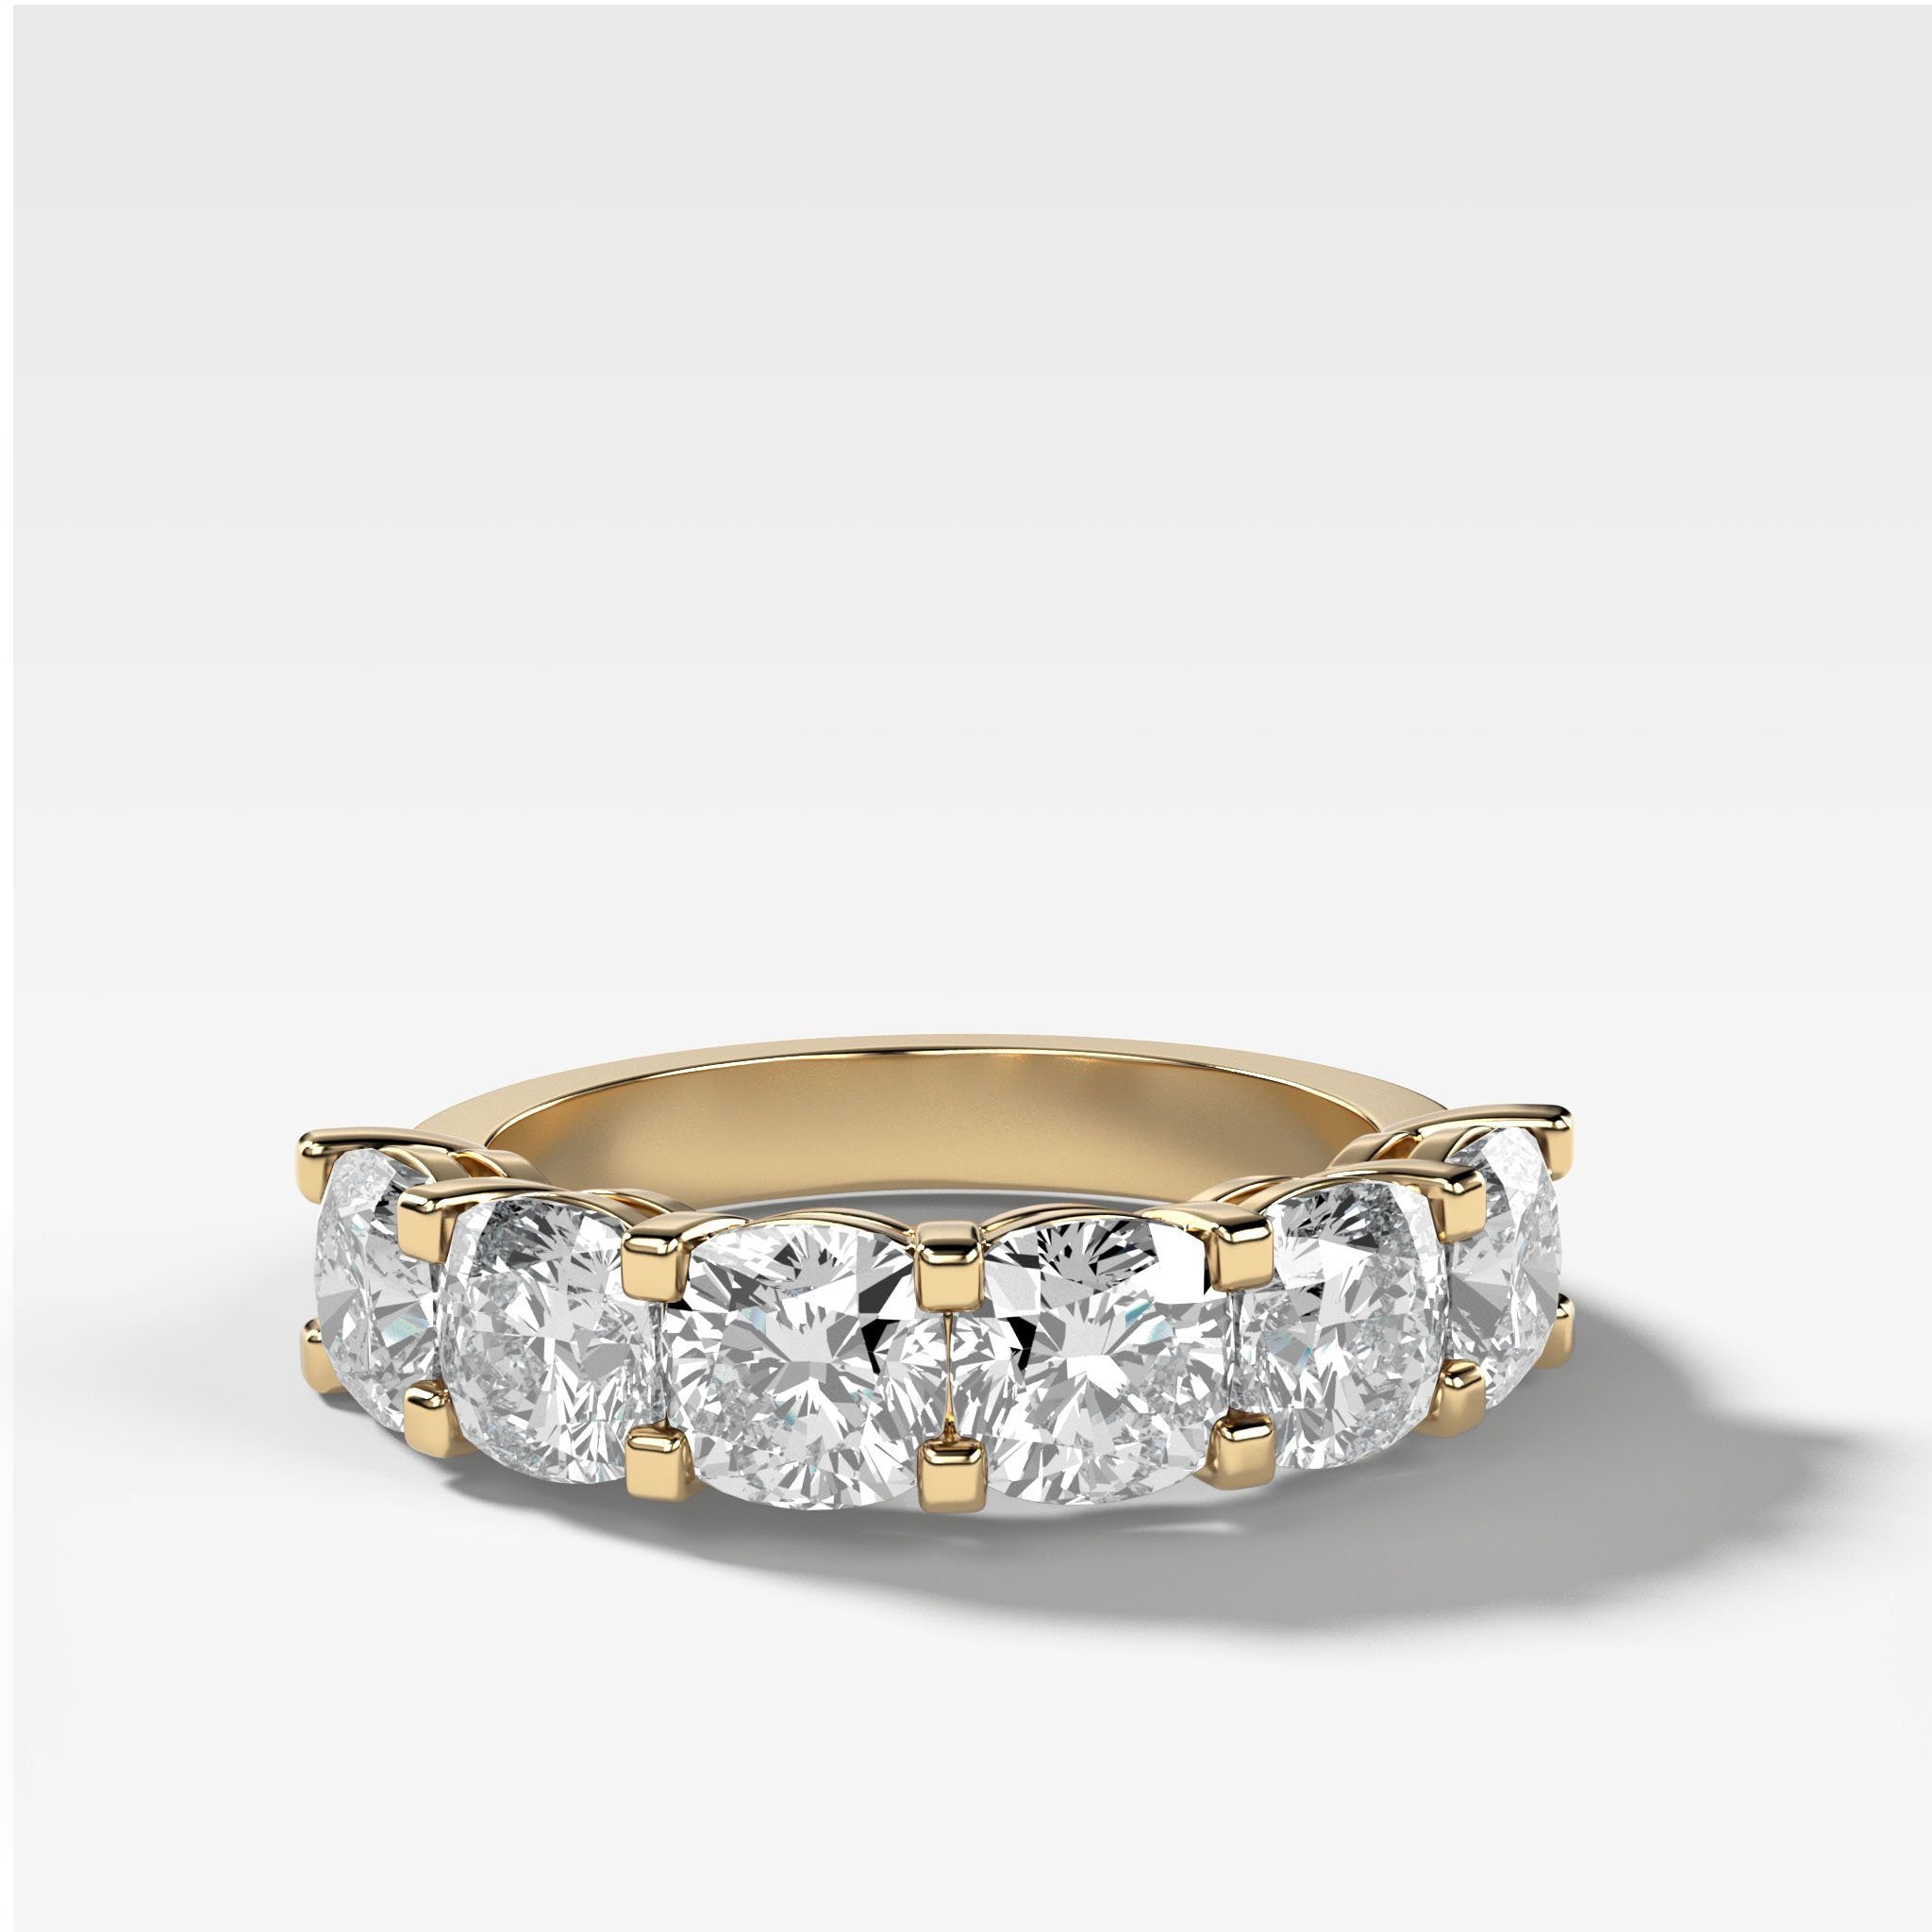 Six Stone Shared Prong Diamond Band With Cushion Cuts by Good Stone in Yellow Gold